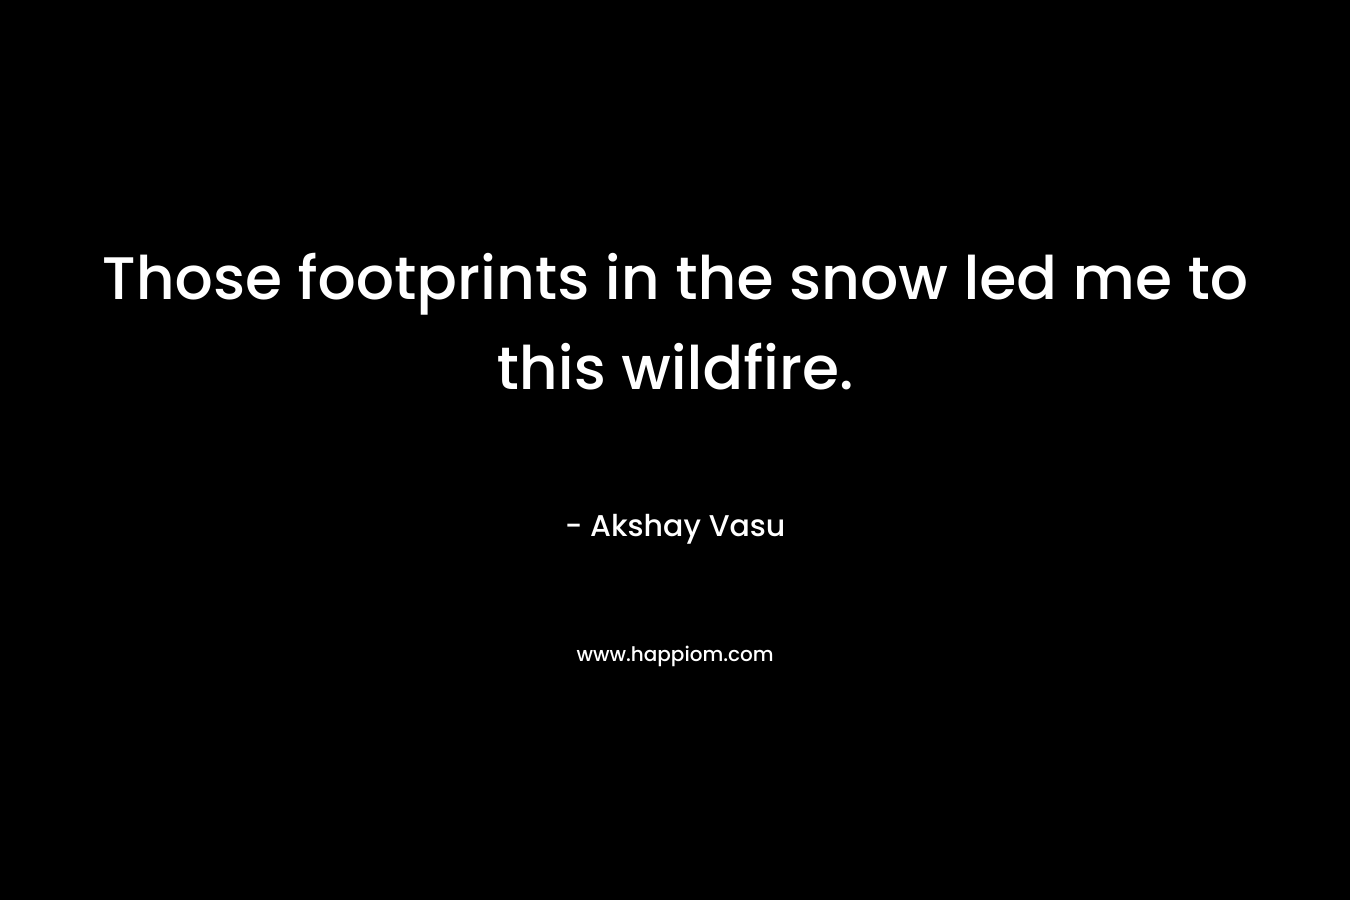 Those footprints in the snow led me to this wildfire.